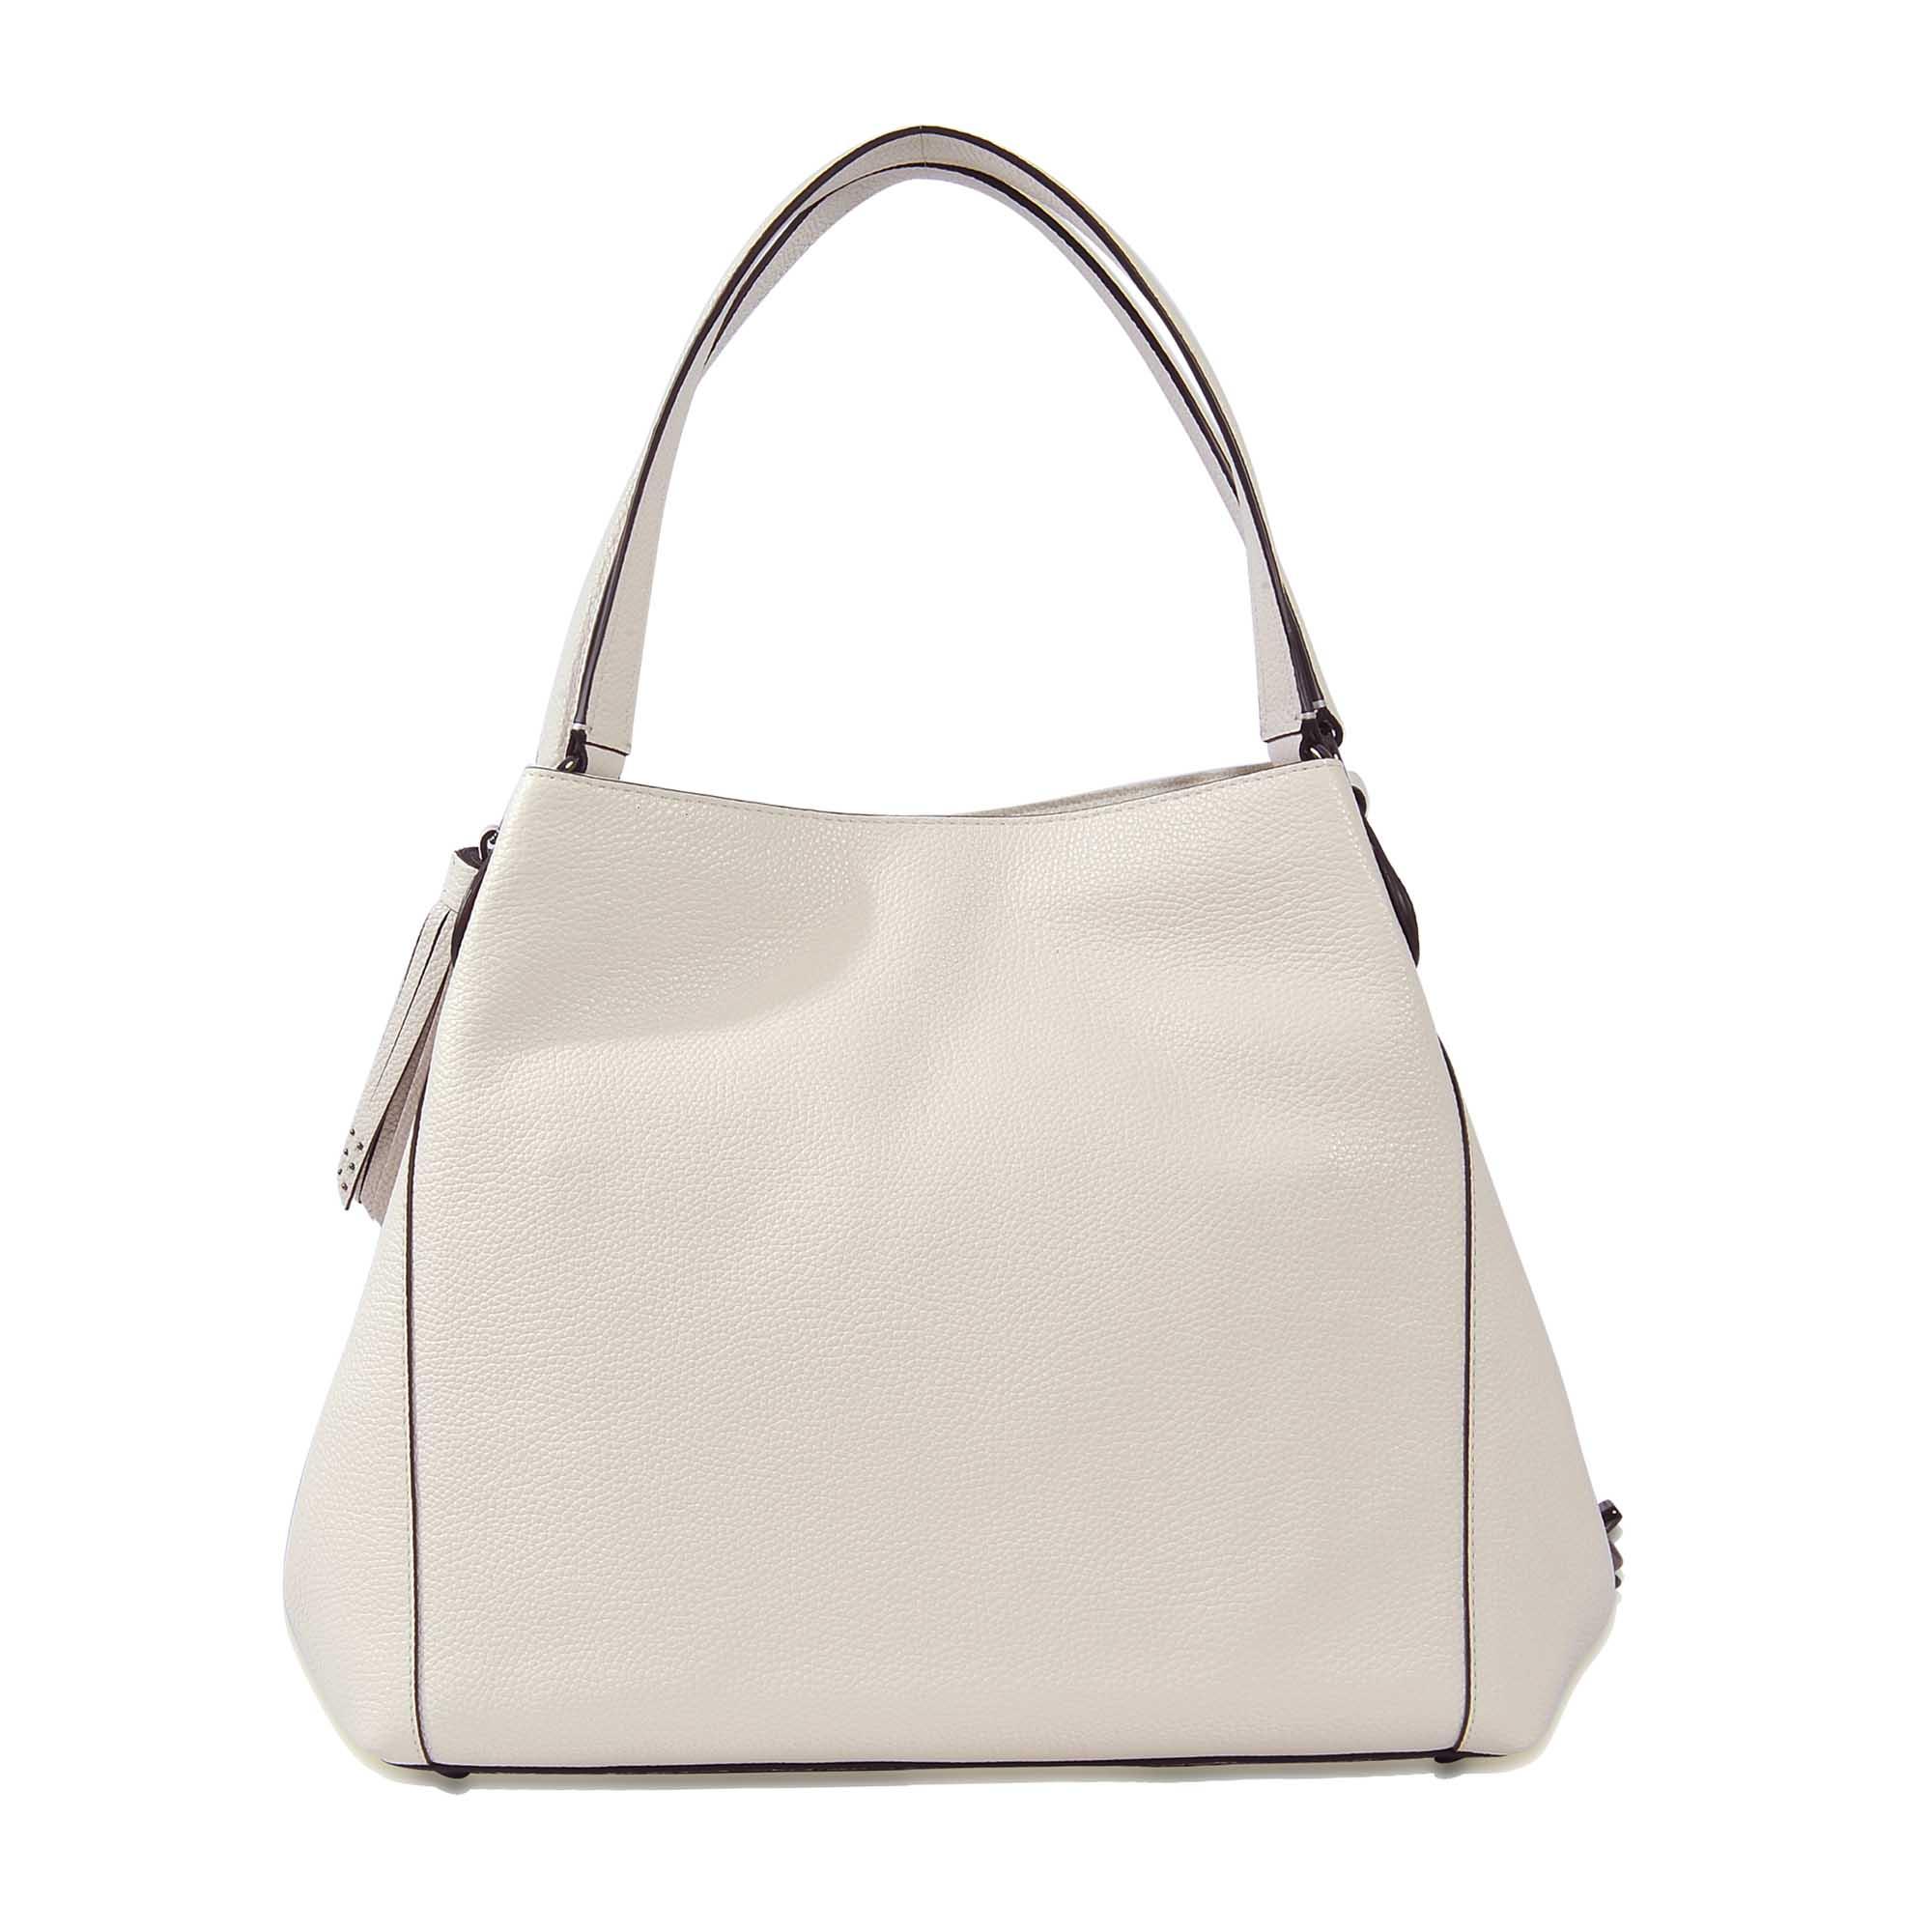 COACH Edie 31 Shoulder Bag In Leather With Studs in White - Lyst